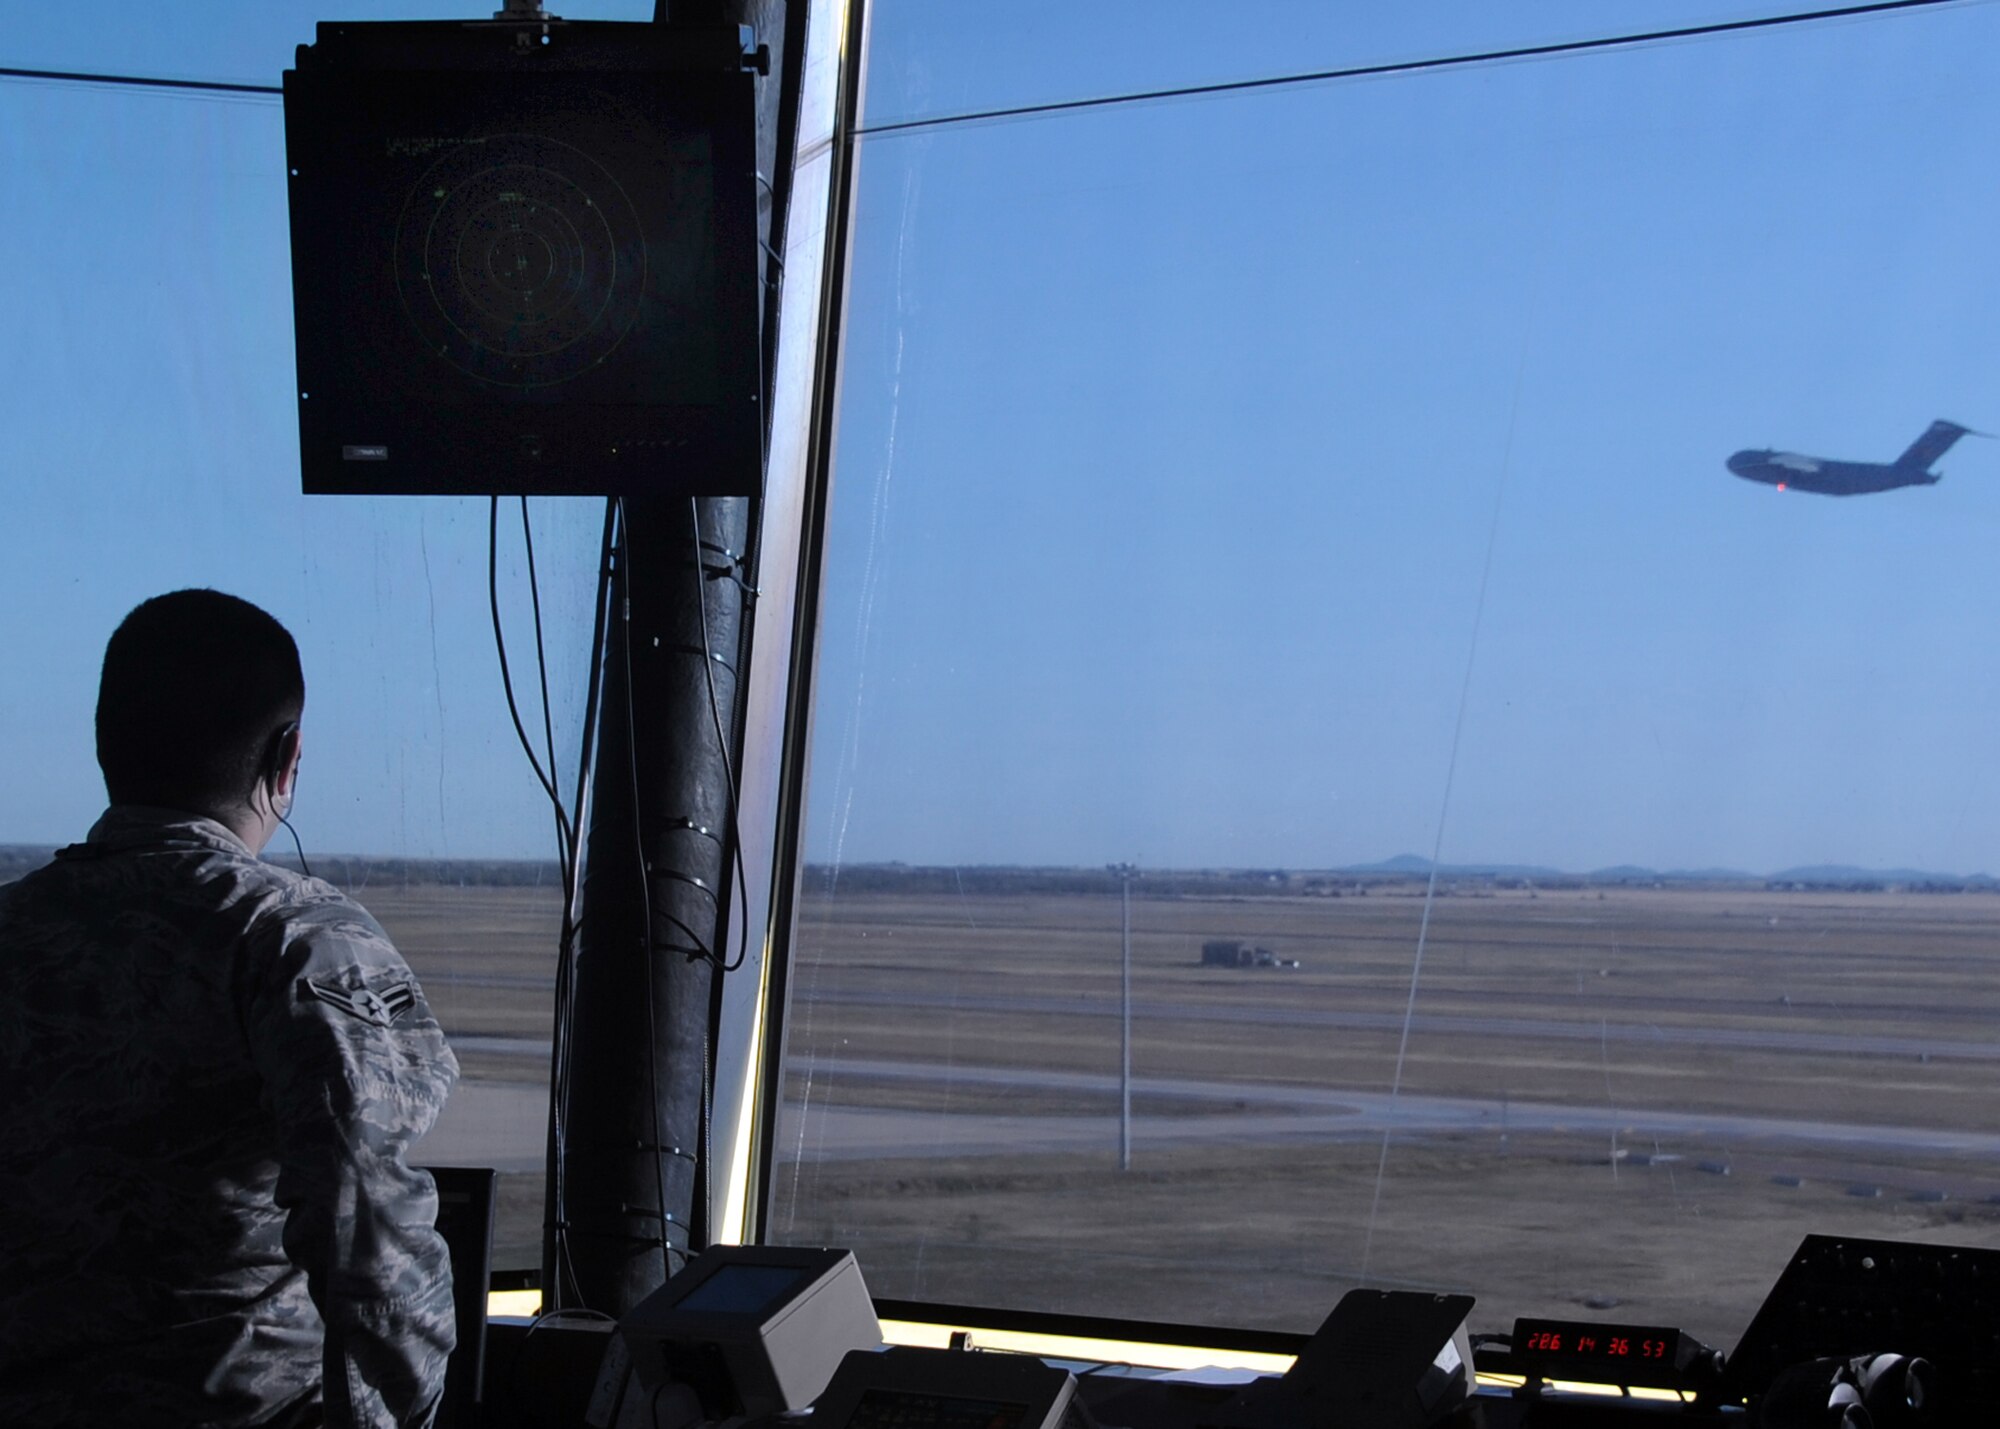 ALTUS AIR FORCE BASE, Okla. – Airman 1st Class Casey J. Noone, 97th Operations Support Squadron air traffic control apprentice, watches from the air traffic control tower as a C-17 Globemaster III takes off Oct. 13, 2011. Noone was working the local control traffic position in the tower and testing to earn his 5- skill level, while his supervisor listened to his communications with pilots and other personnel and graded him. (U.S. Air Force photo by Airman 1st Class Kenneth W. Norman / Released / 97th Air Mobility Wing Public Affairs) 